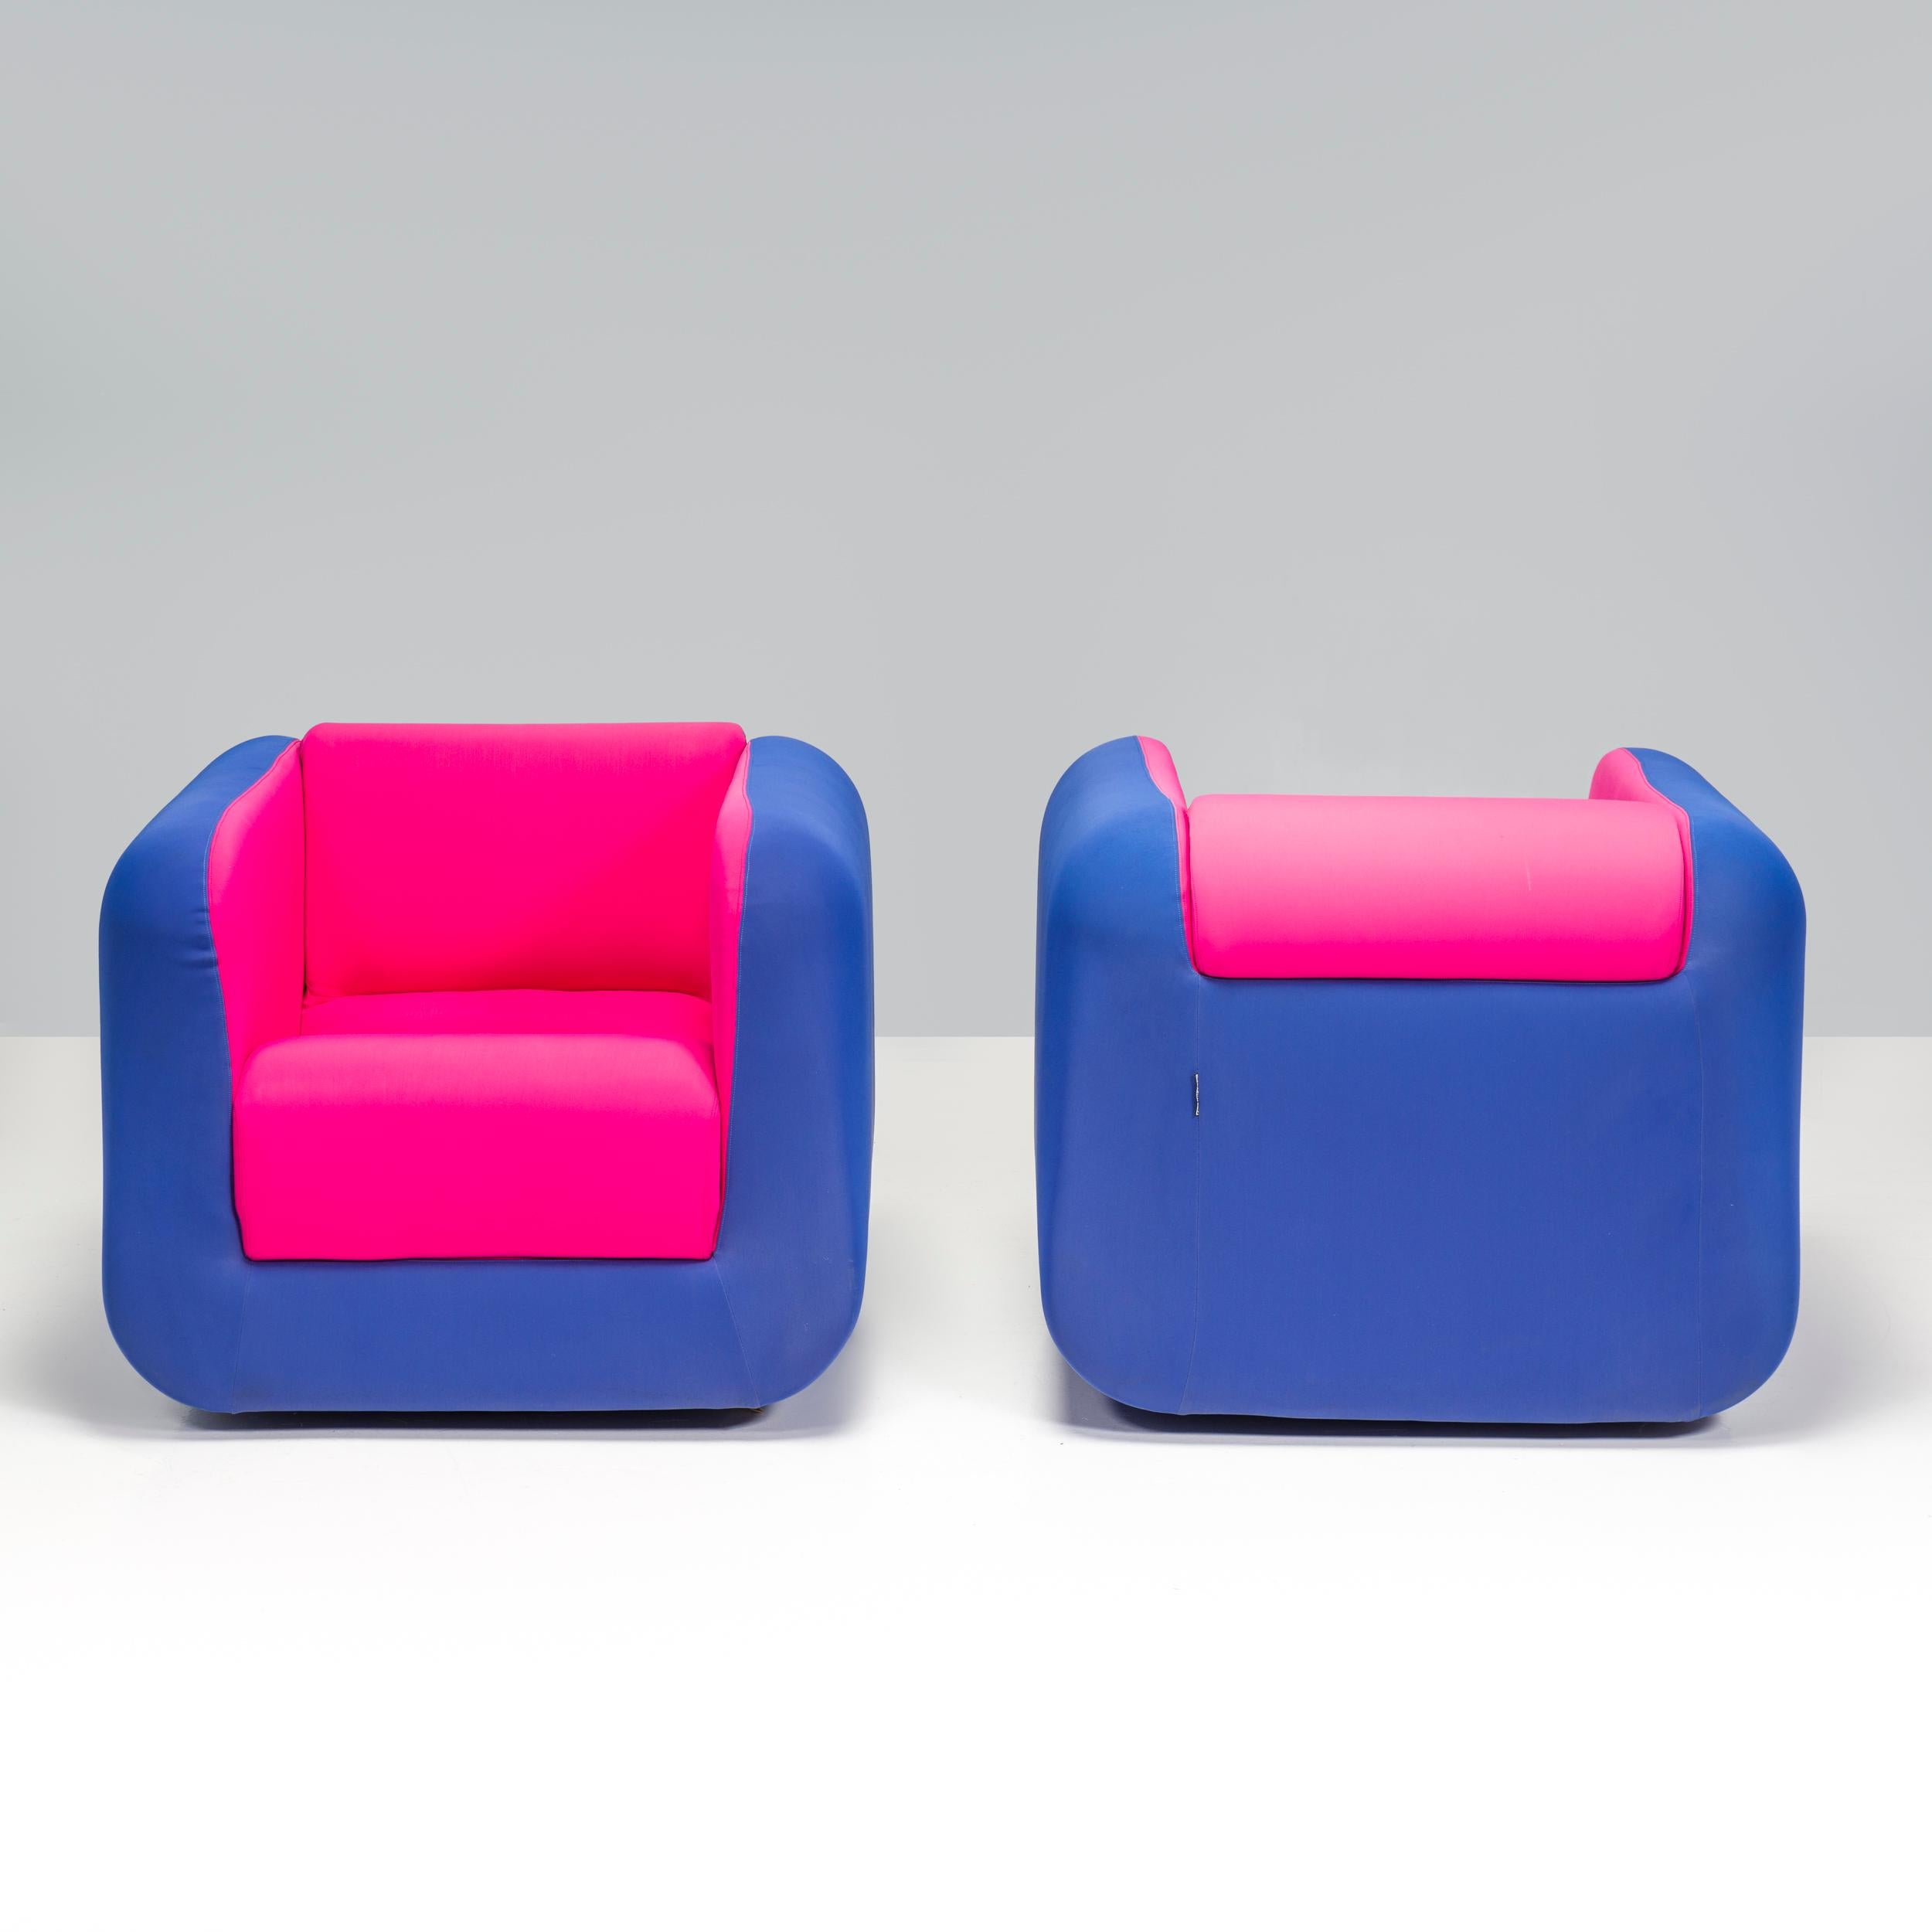 French Roche Bobois Pink & Blue Cube Armchairs, Set of 2